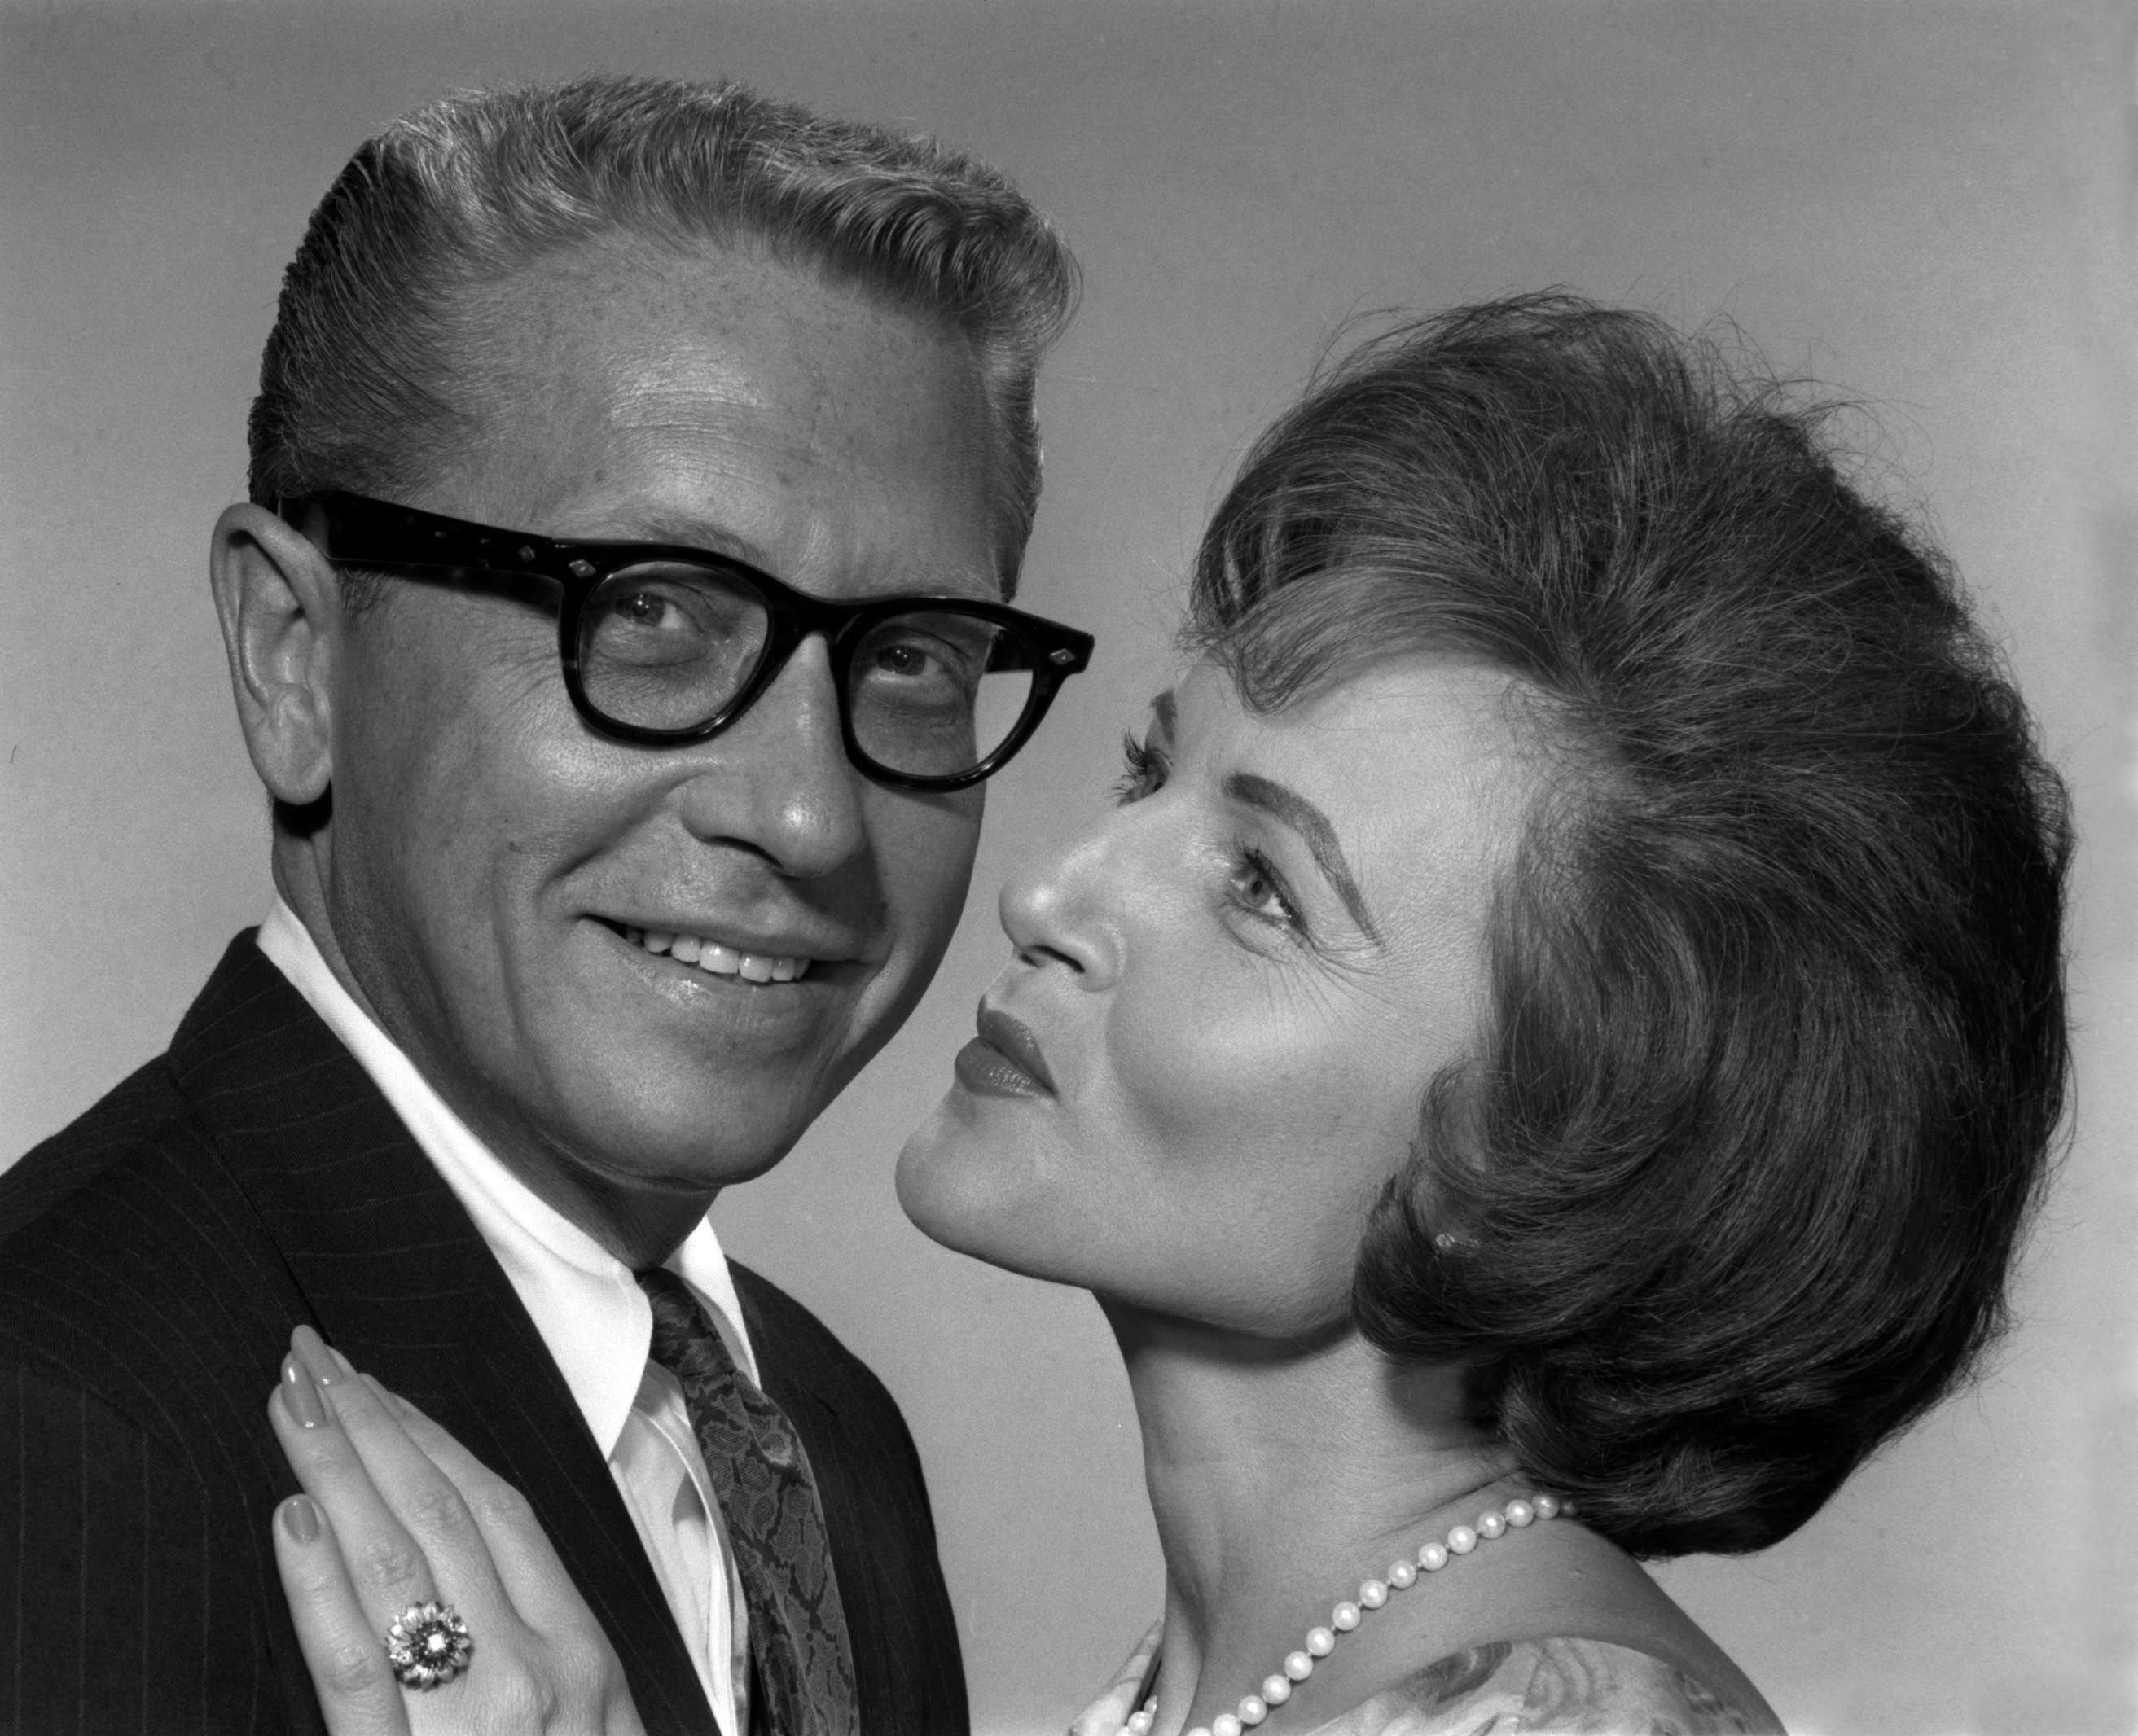 Betty White puts one hand on Allen Ludden and smiles